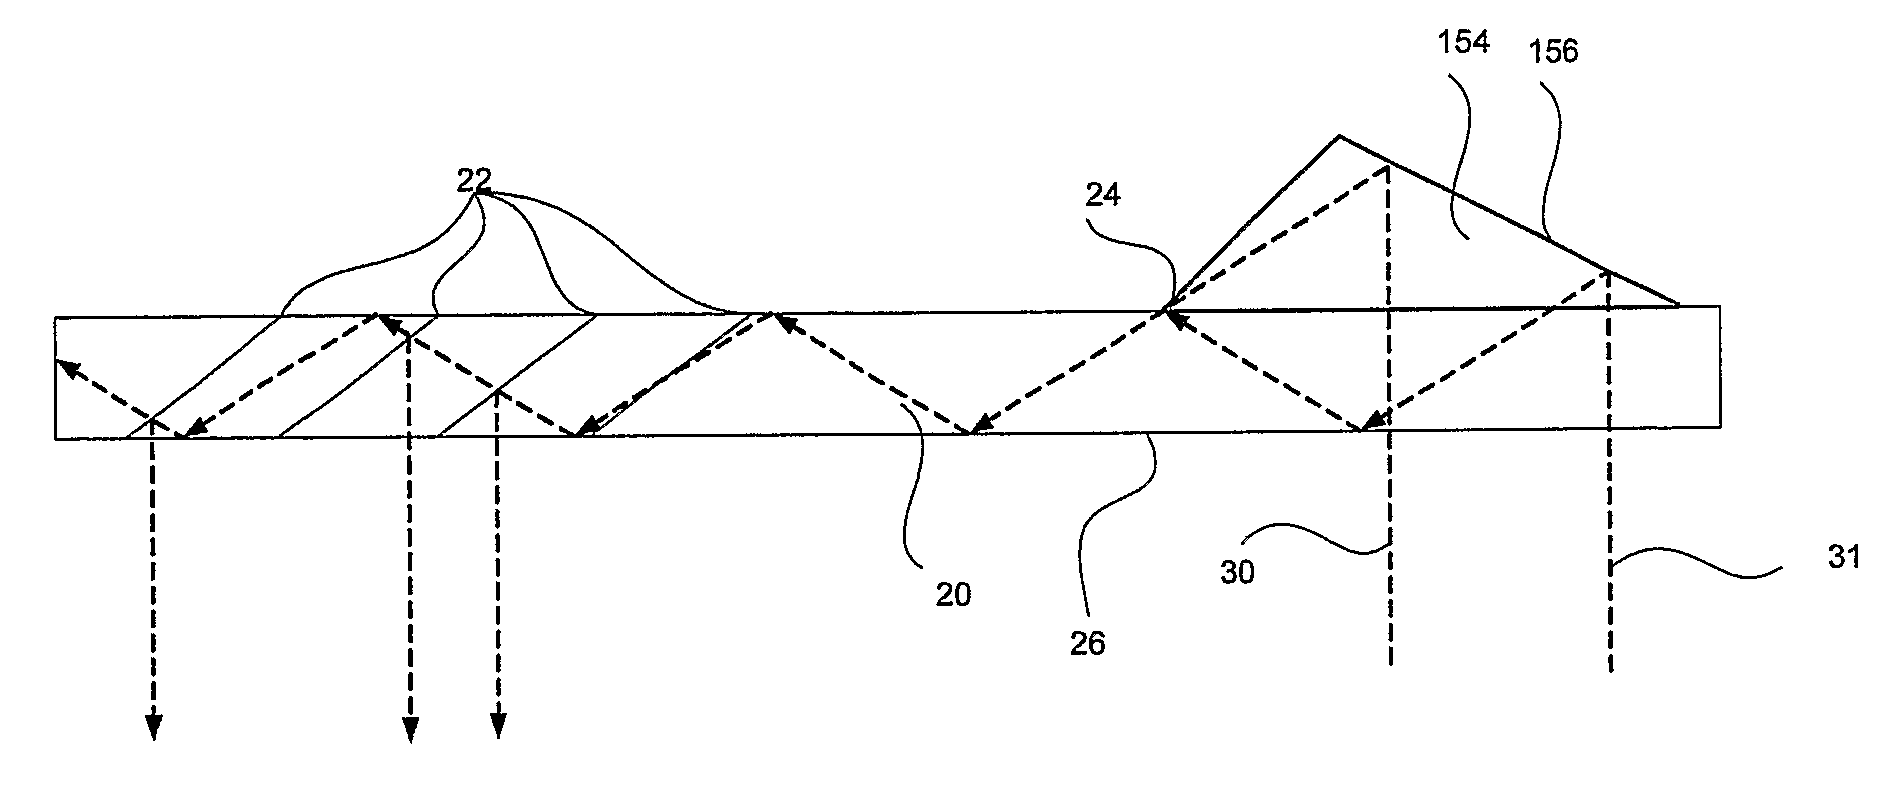 Optical device having a light transmitting substrate with external light coupling means